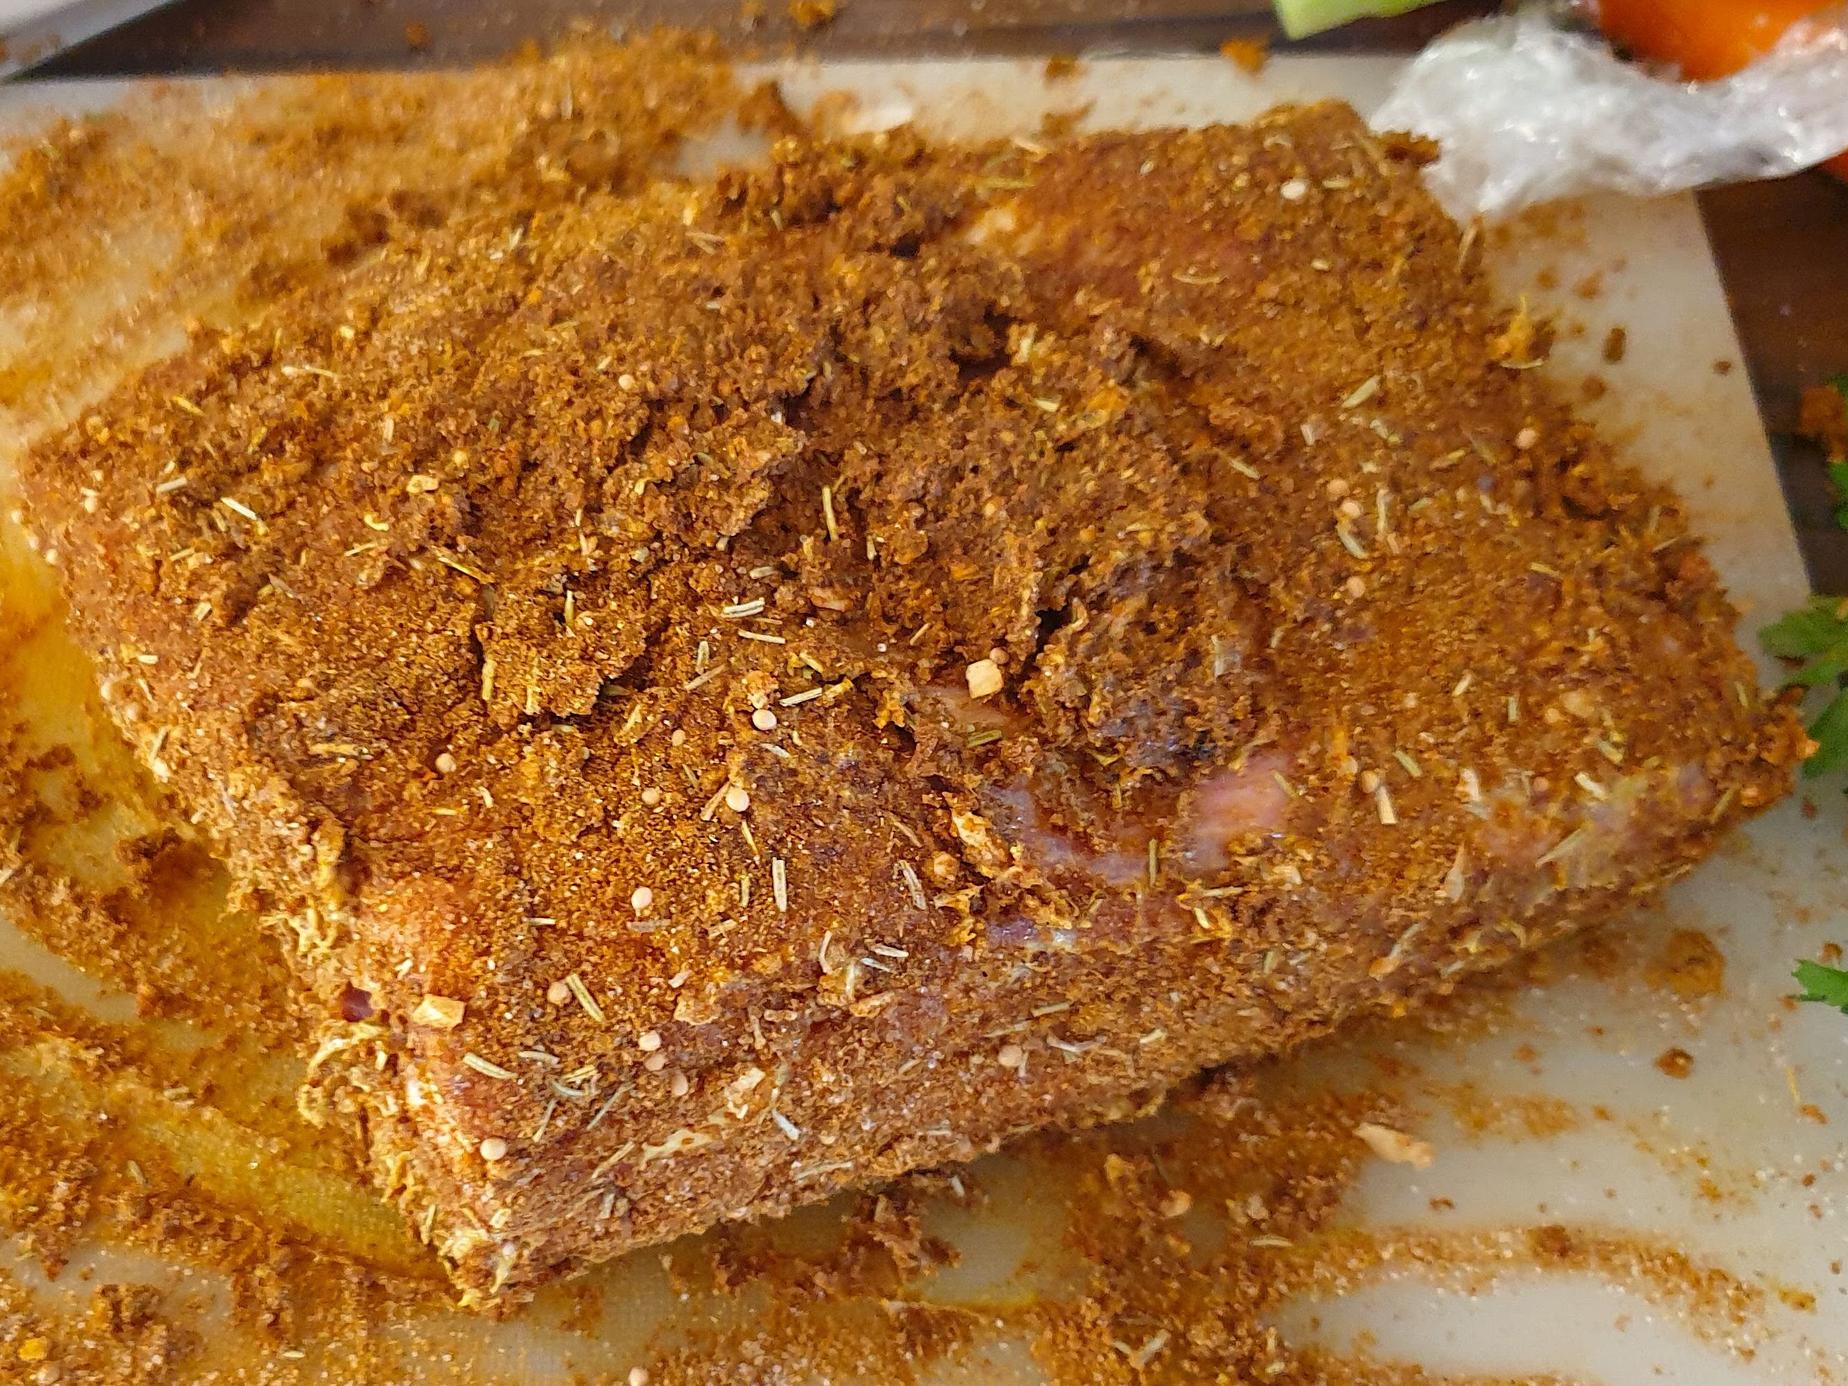 Pulled pork spices